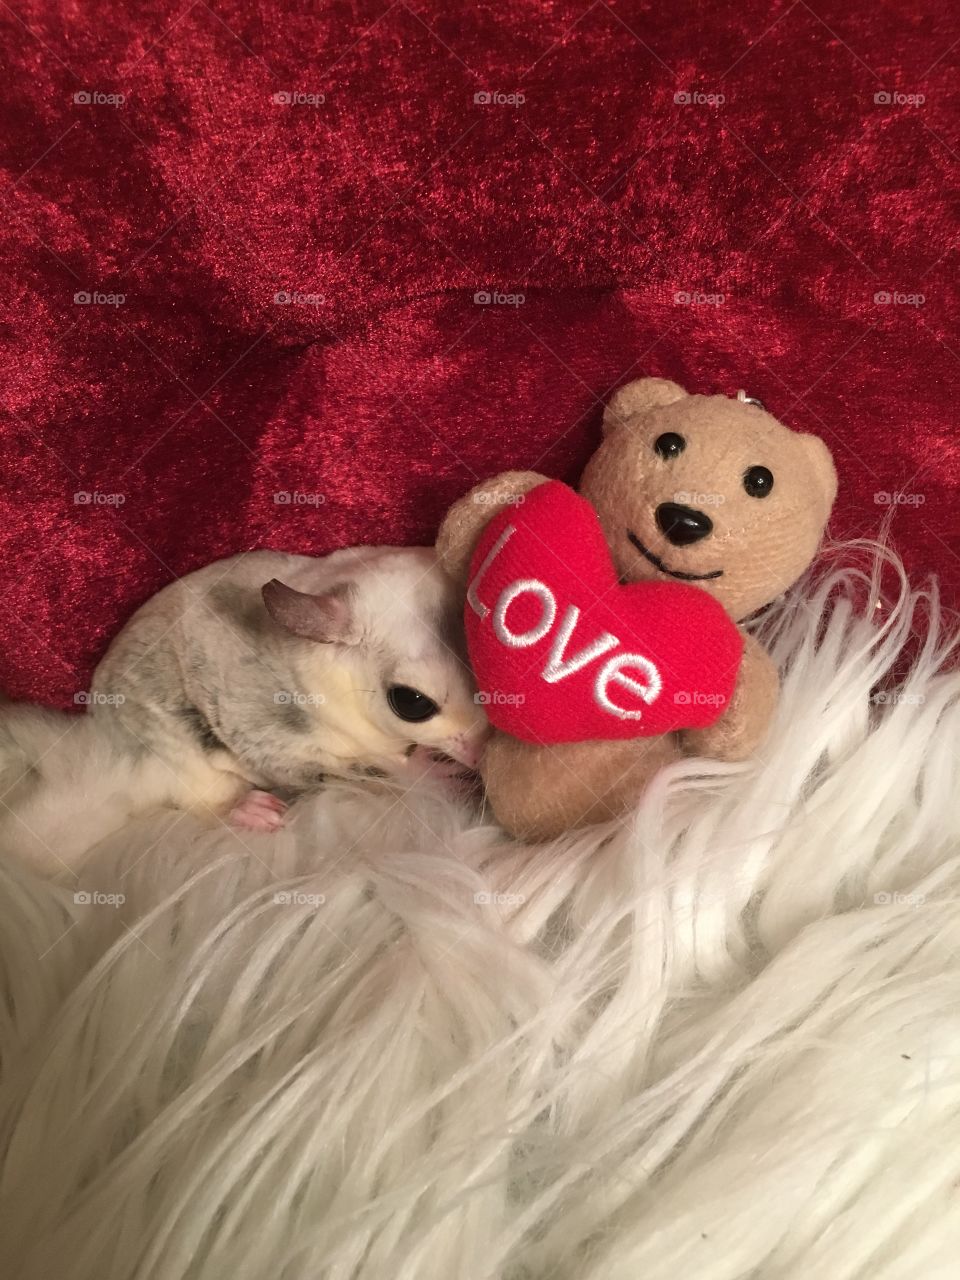 Mosaic sugar glider snuggling a teddy bear holding a love heart with fuzzy white ground and velvet red background. 